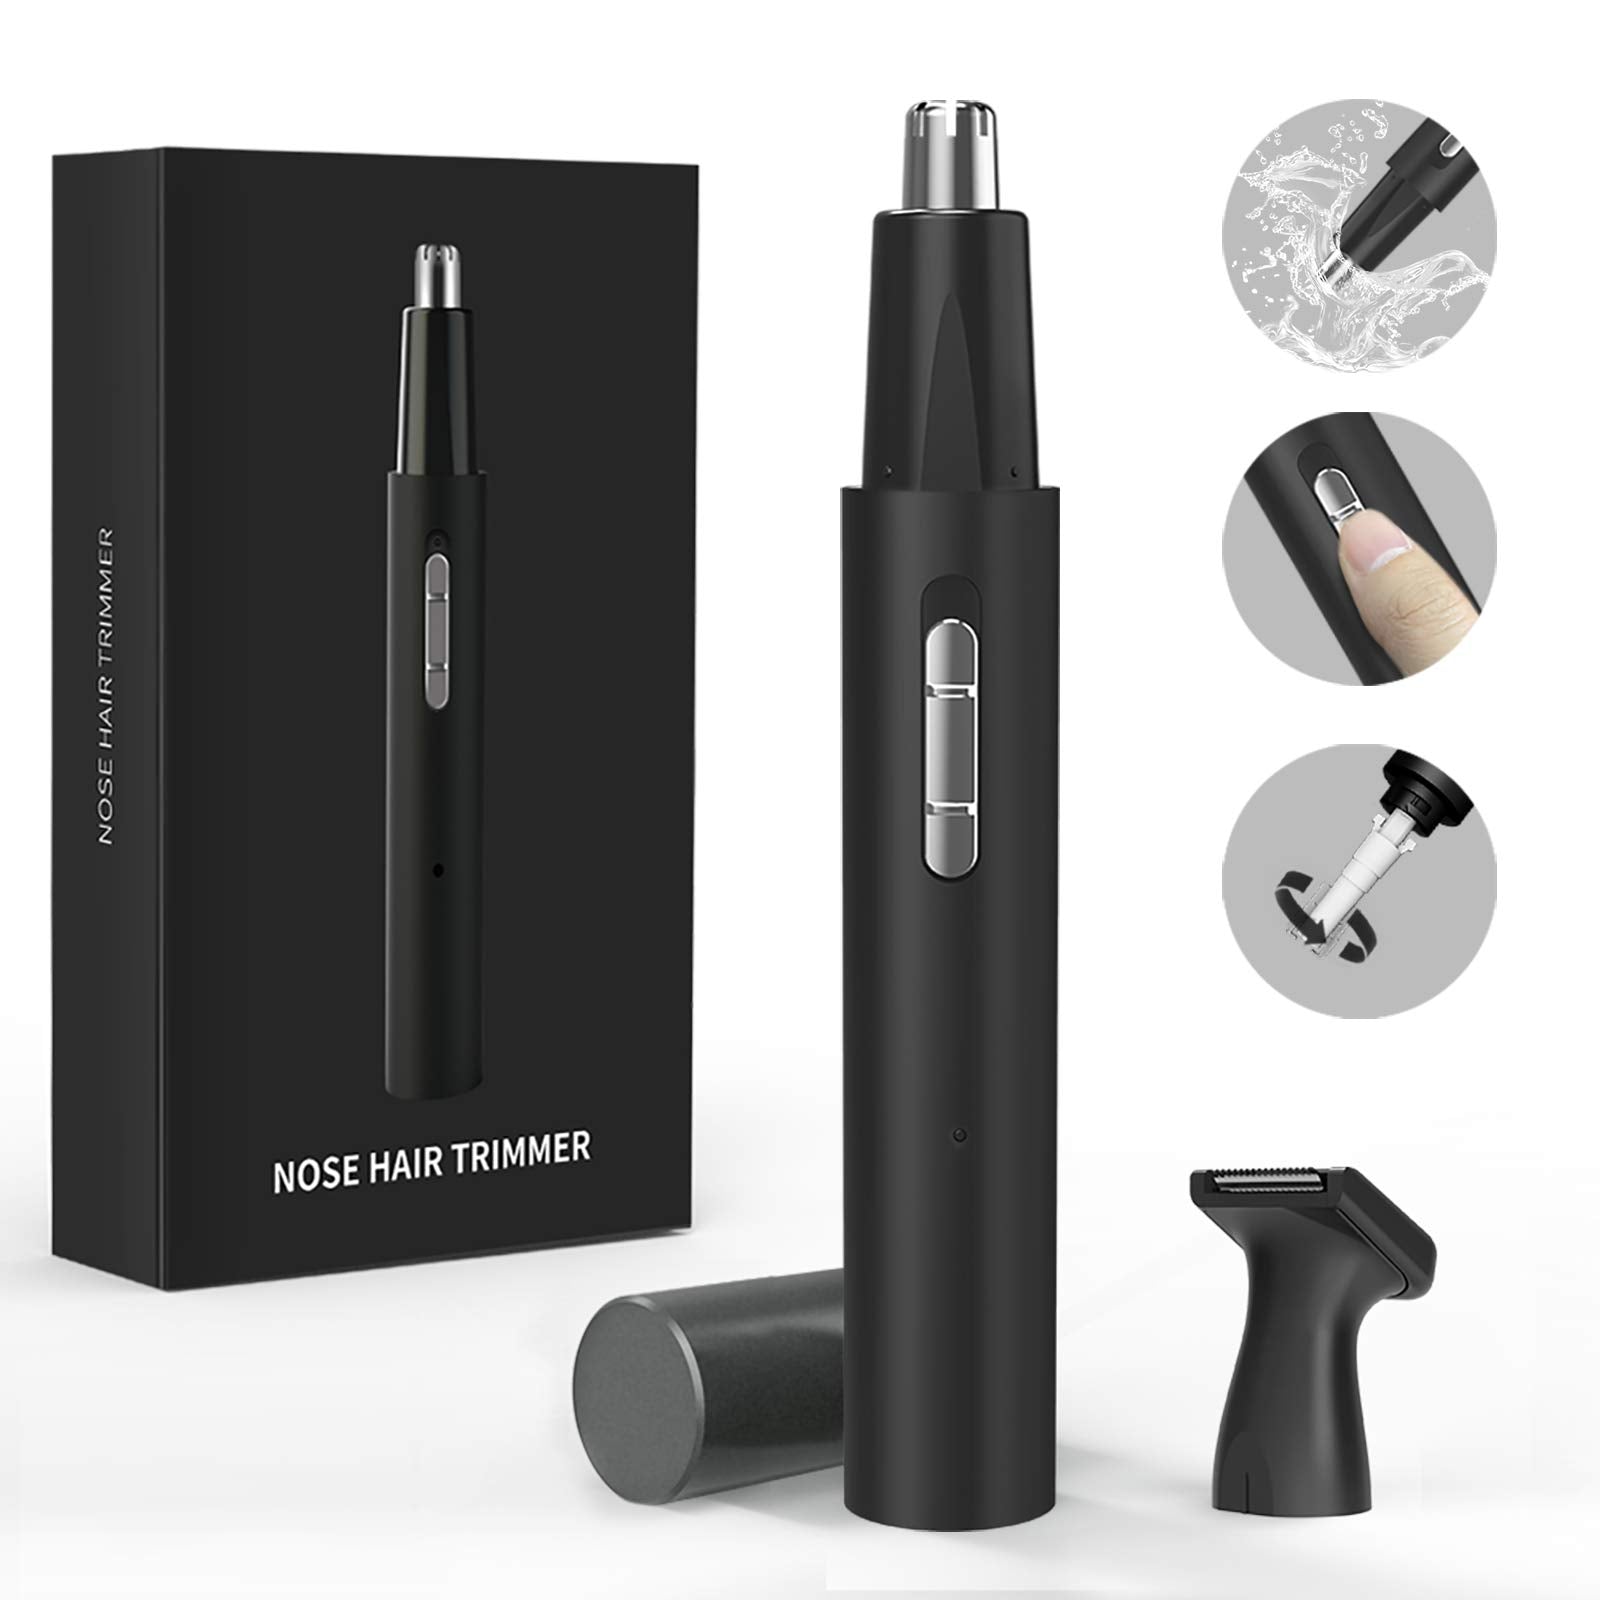 Nose Hair Trimmer for Men and Women, 2-in-1 Professional Painless USB Rechargeable Nasal and Ear Hair Trimmer, IPX7 Waterproof, Wet and Dry, Safe, Comfortable and Easy to Clean (Black)